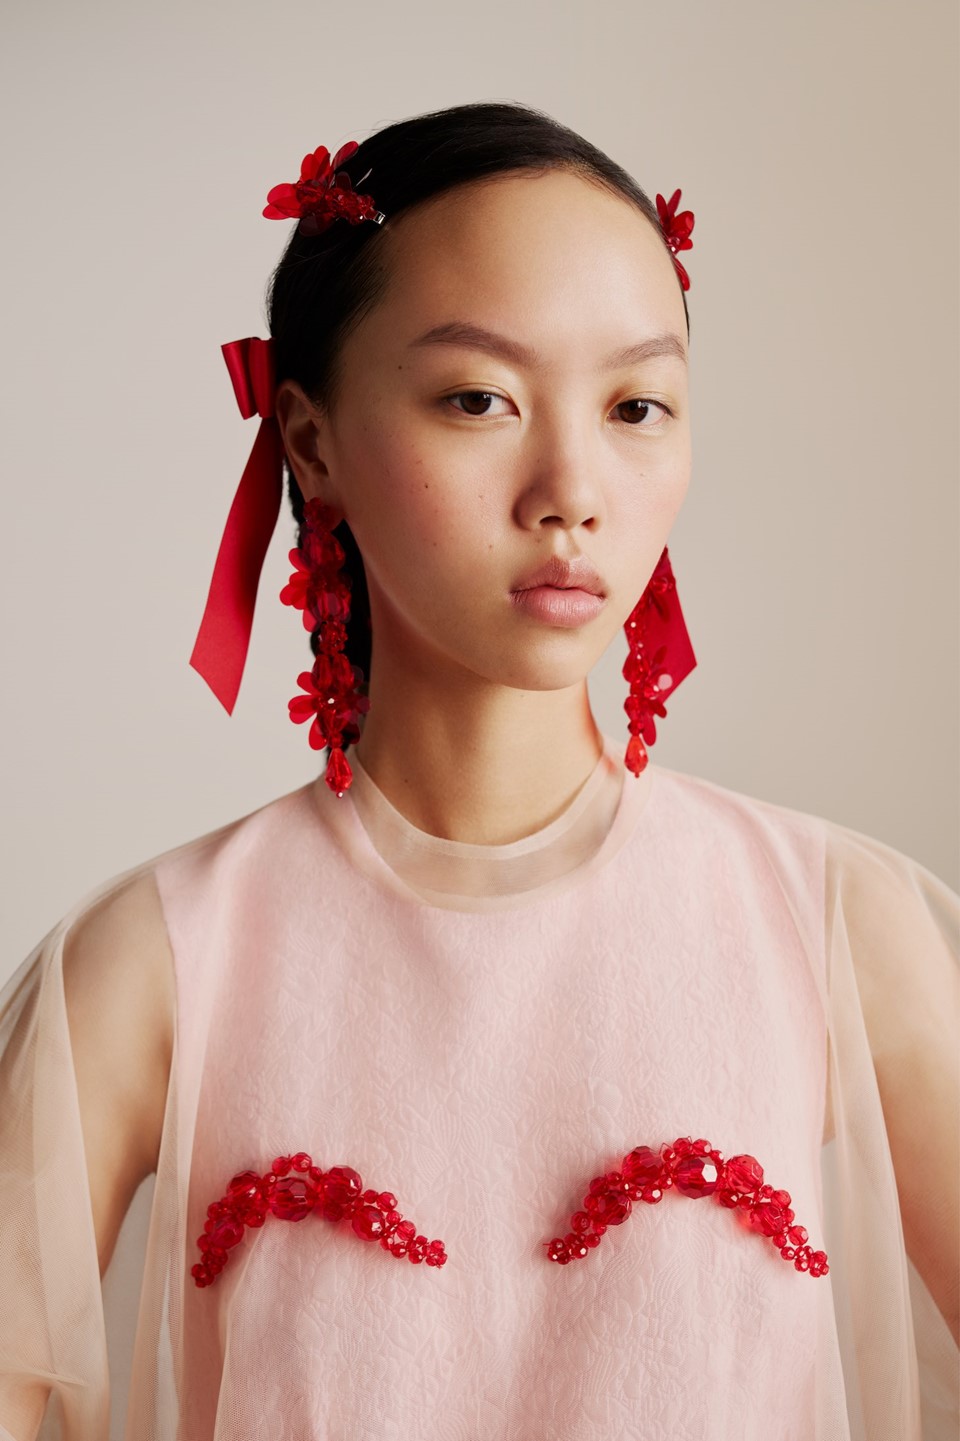 A new Simone Rocha x H&M collab is coming | Dazed